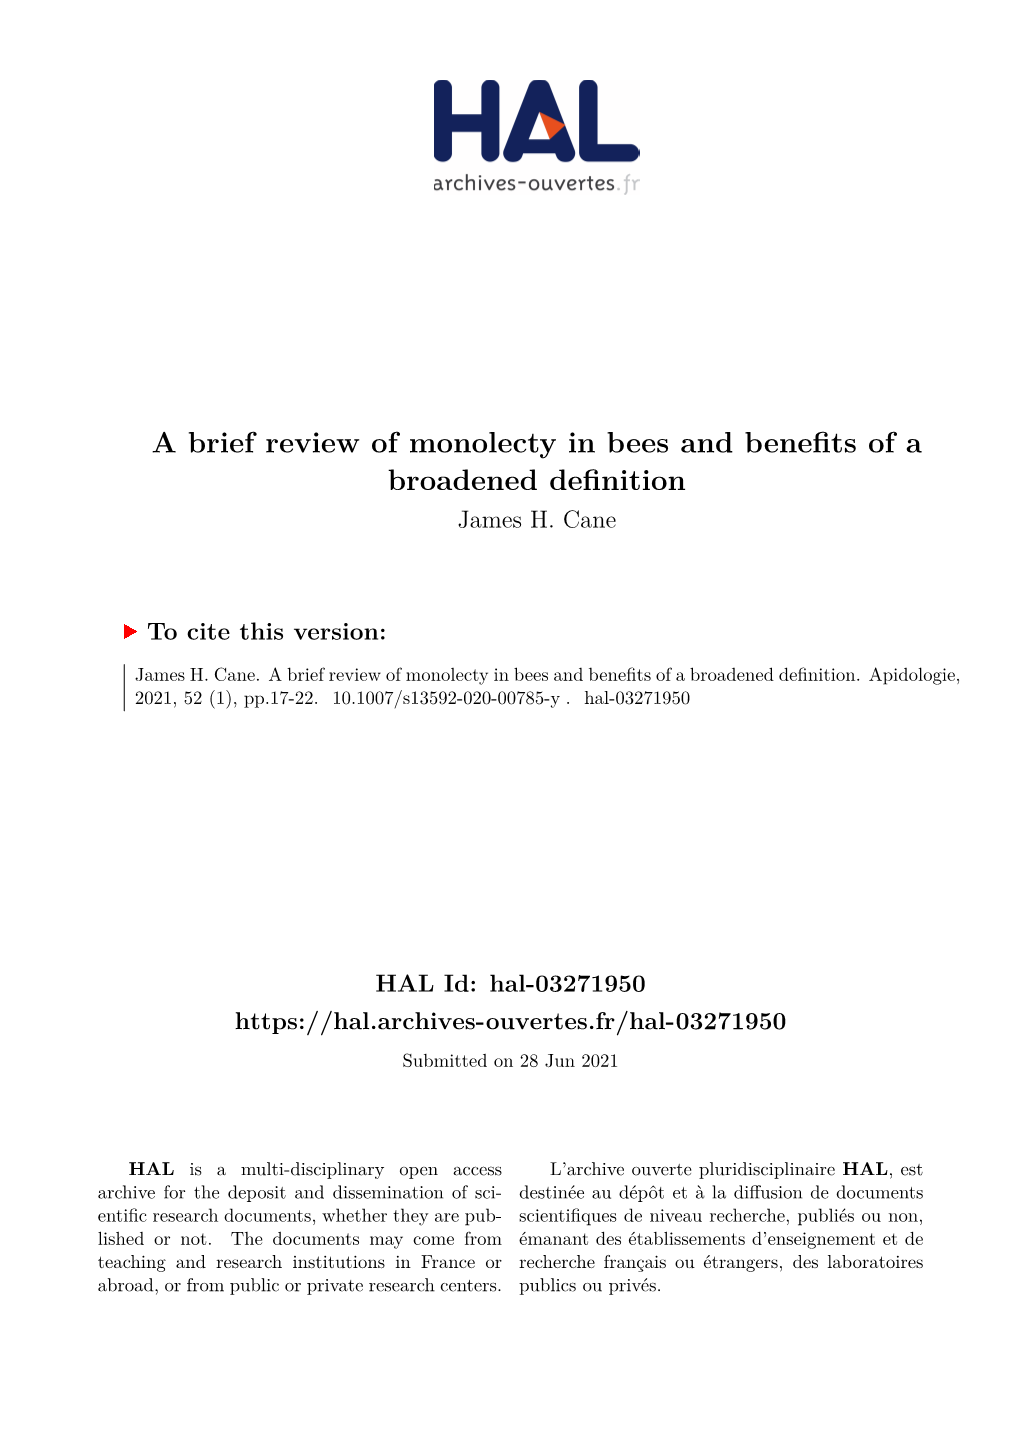 A Brief Review of Monolecty in Bees and Benefits of a Broadened Definition James H